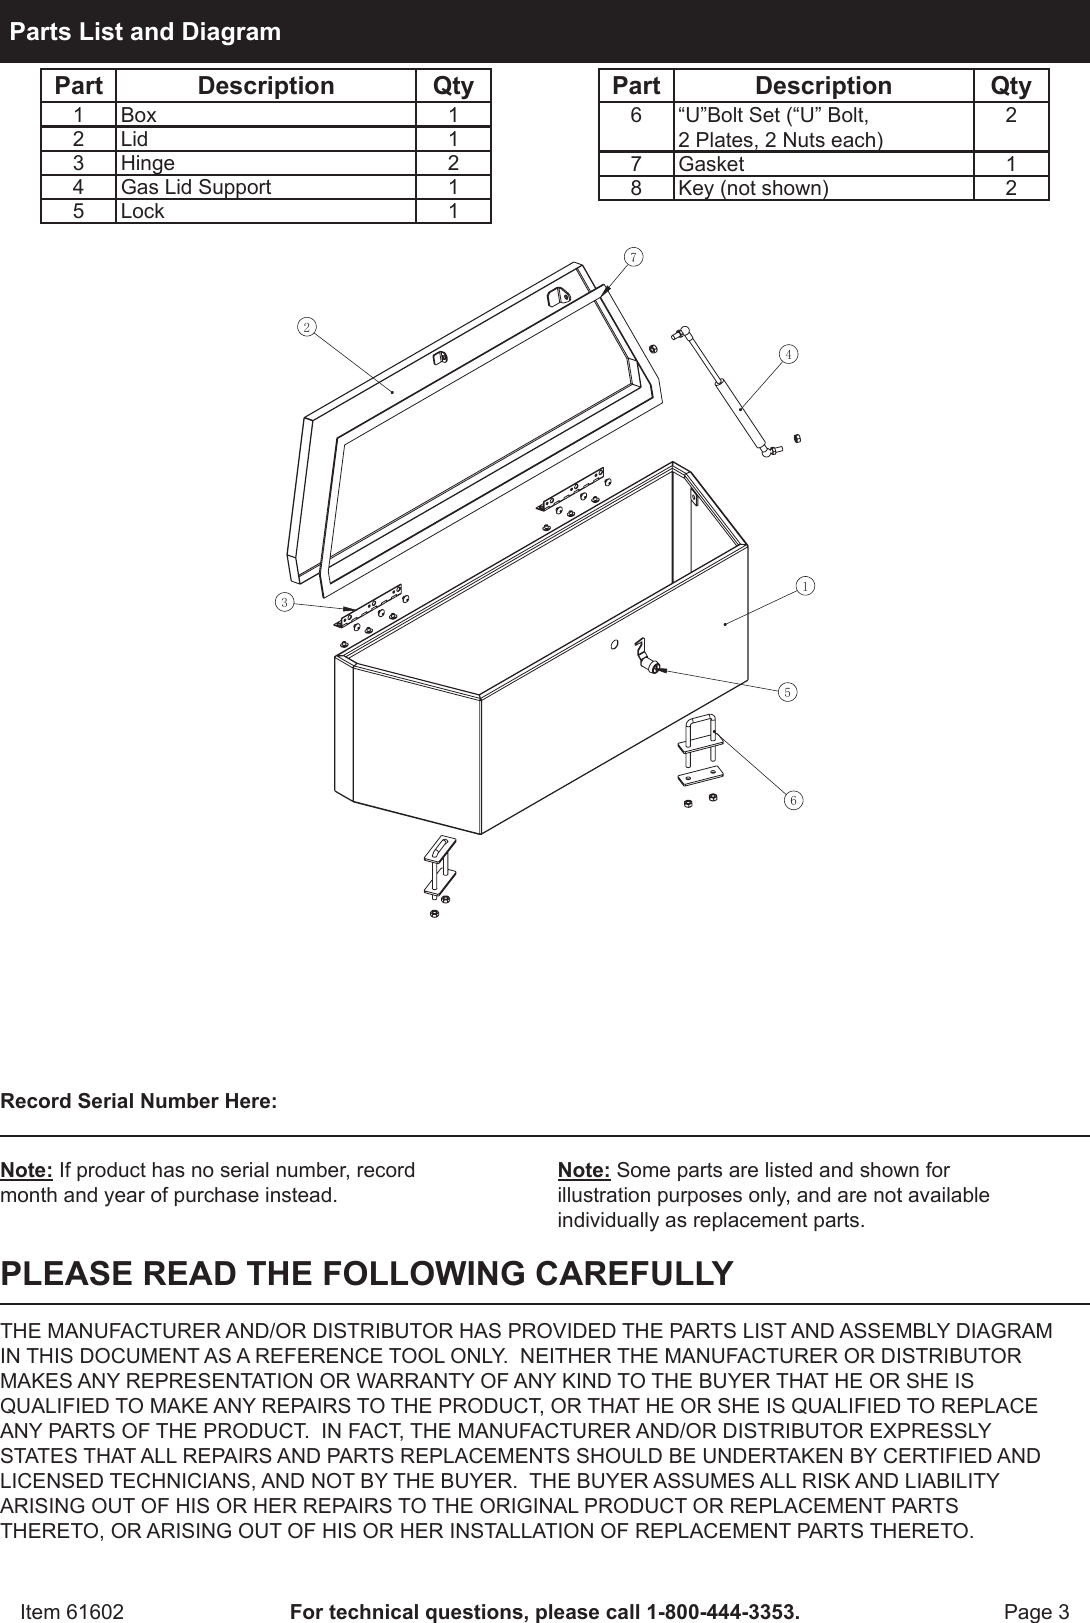 Page 3 of 4 - Harbor-Freight Harbor-Freight-2-1-3-Cu-Ft-Steel-Trailer-Tongue-Box-Product-Manual-  Harbor-freight-2-1-3-cu-ft-steel-trailer-tongue-box-product-manual